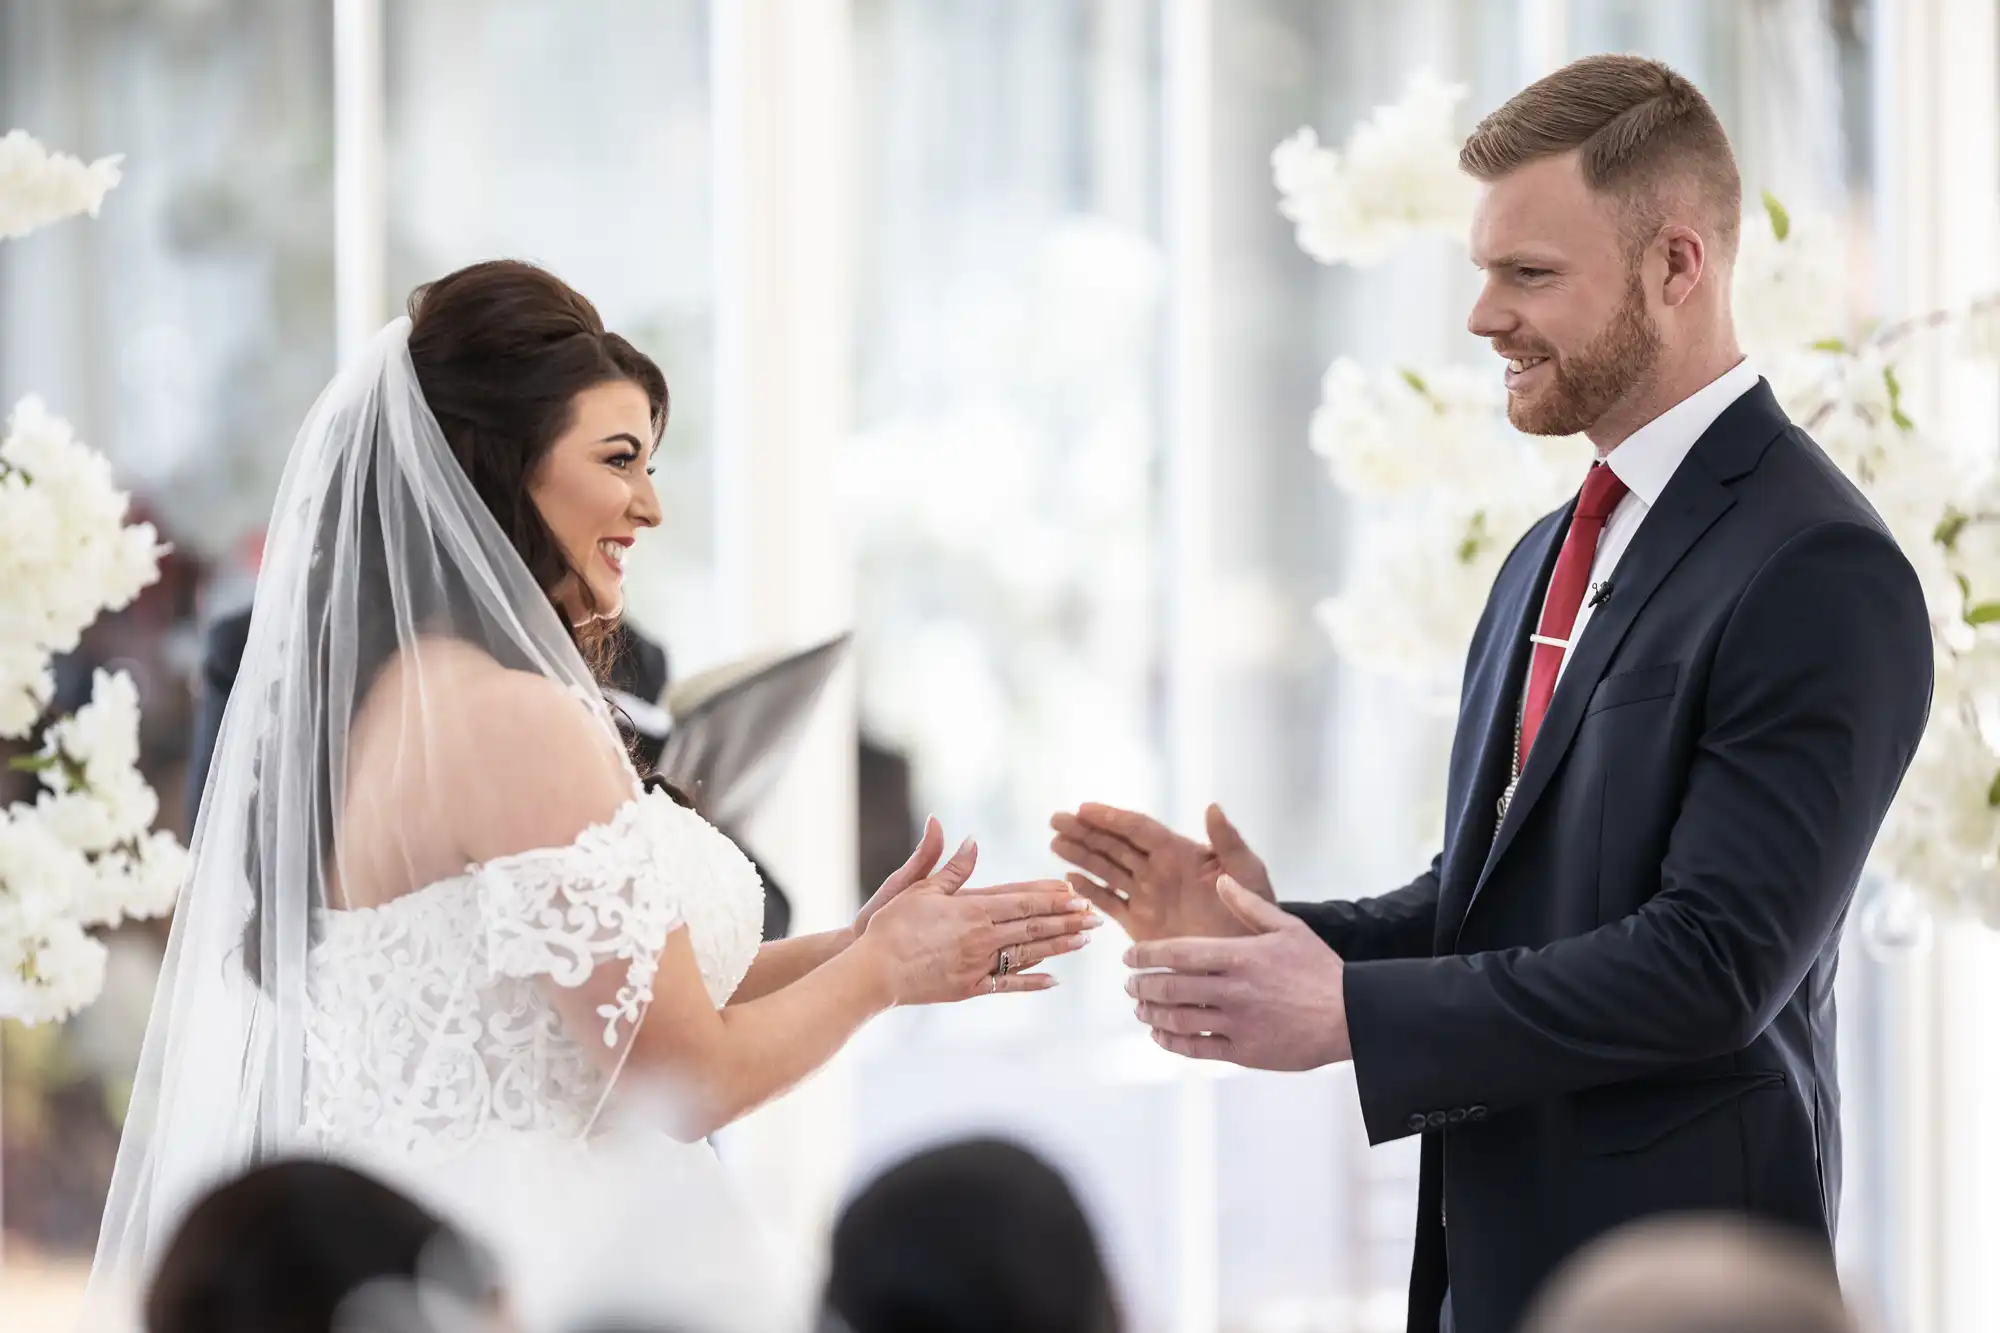 A bride and groom, both smiling, face each other at their wedding ceremony. The bride wears a white lace off-the-shoulder gown and a veil, while the groom is in a dark suit with a red tie.